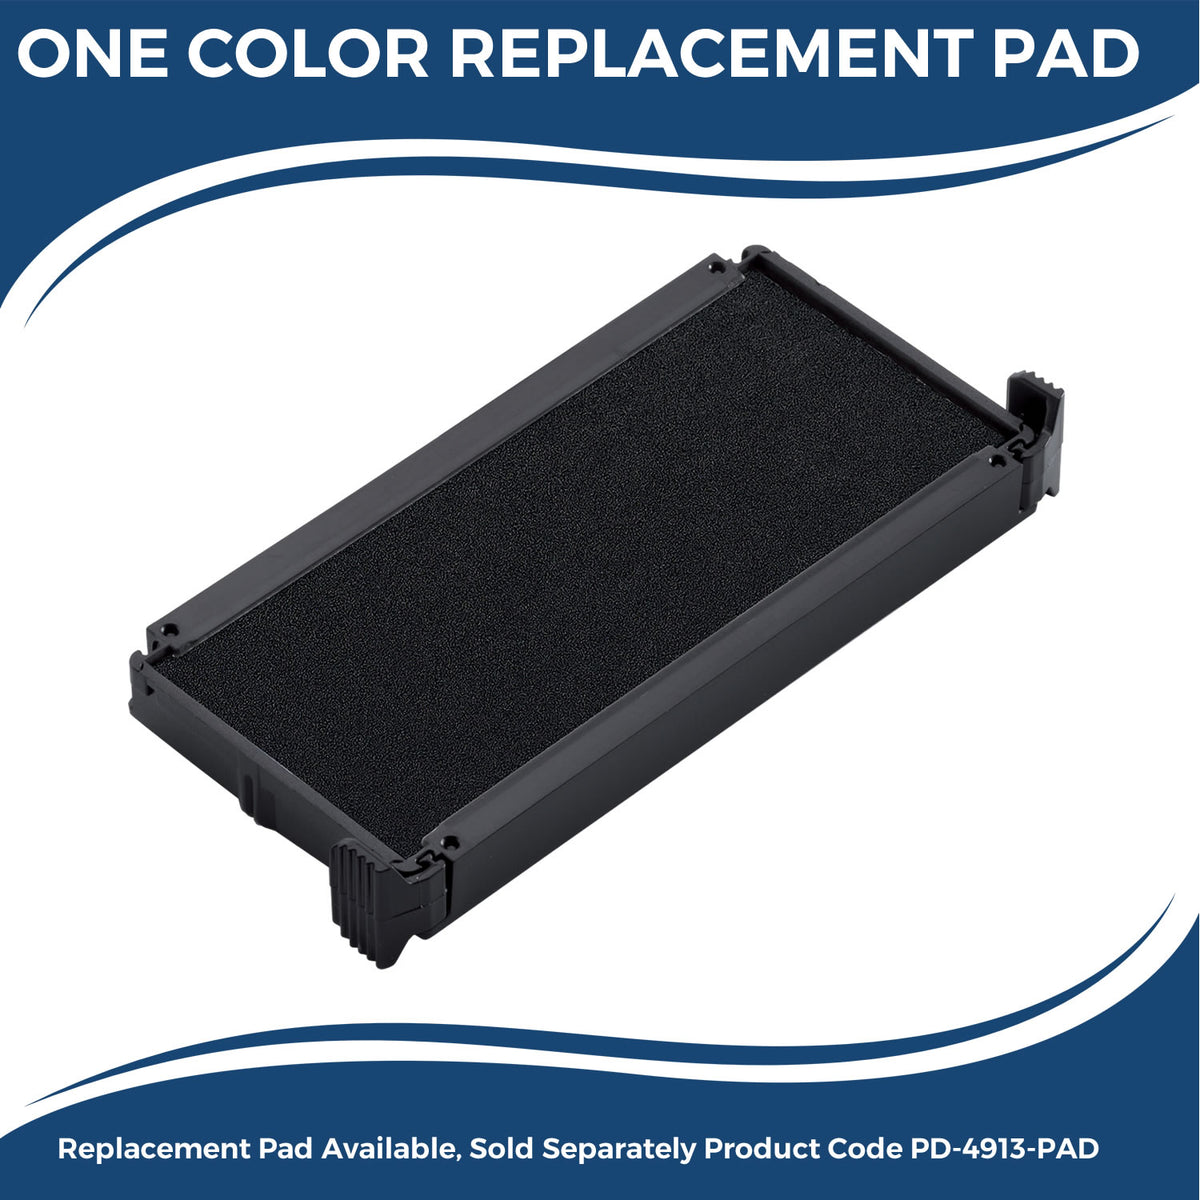 Large Self-Inking Privileged Stamp 4908S Large Replacment Pad